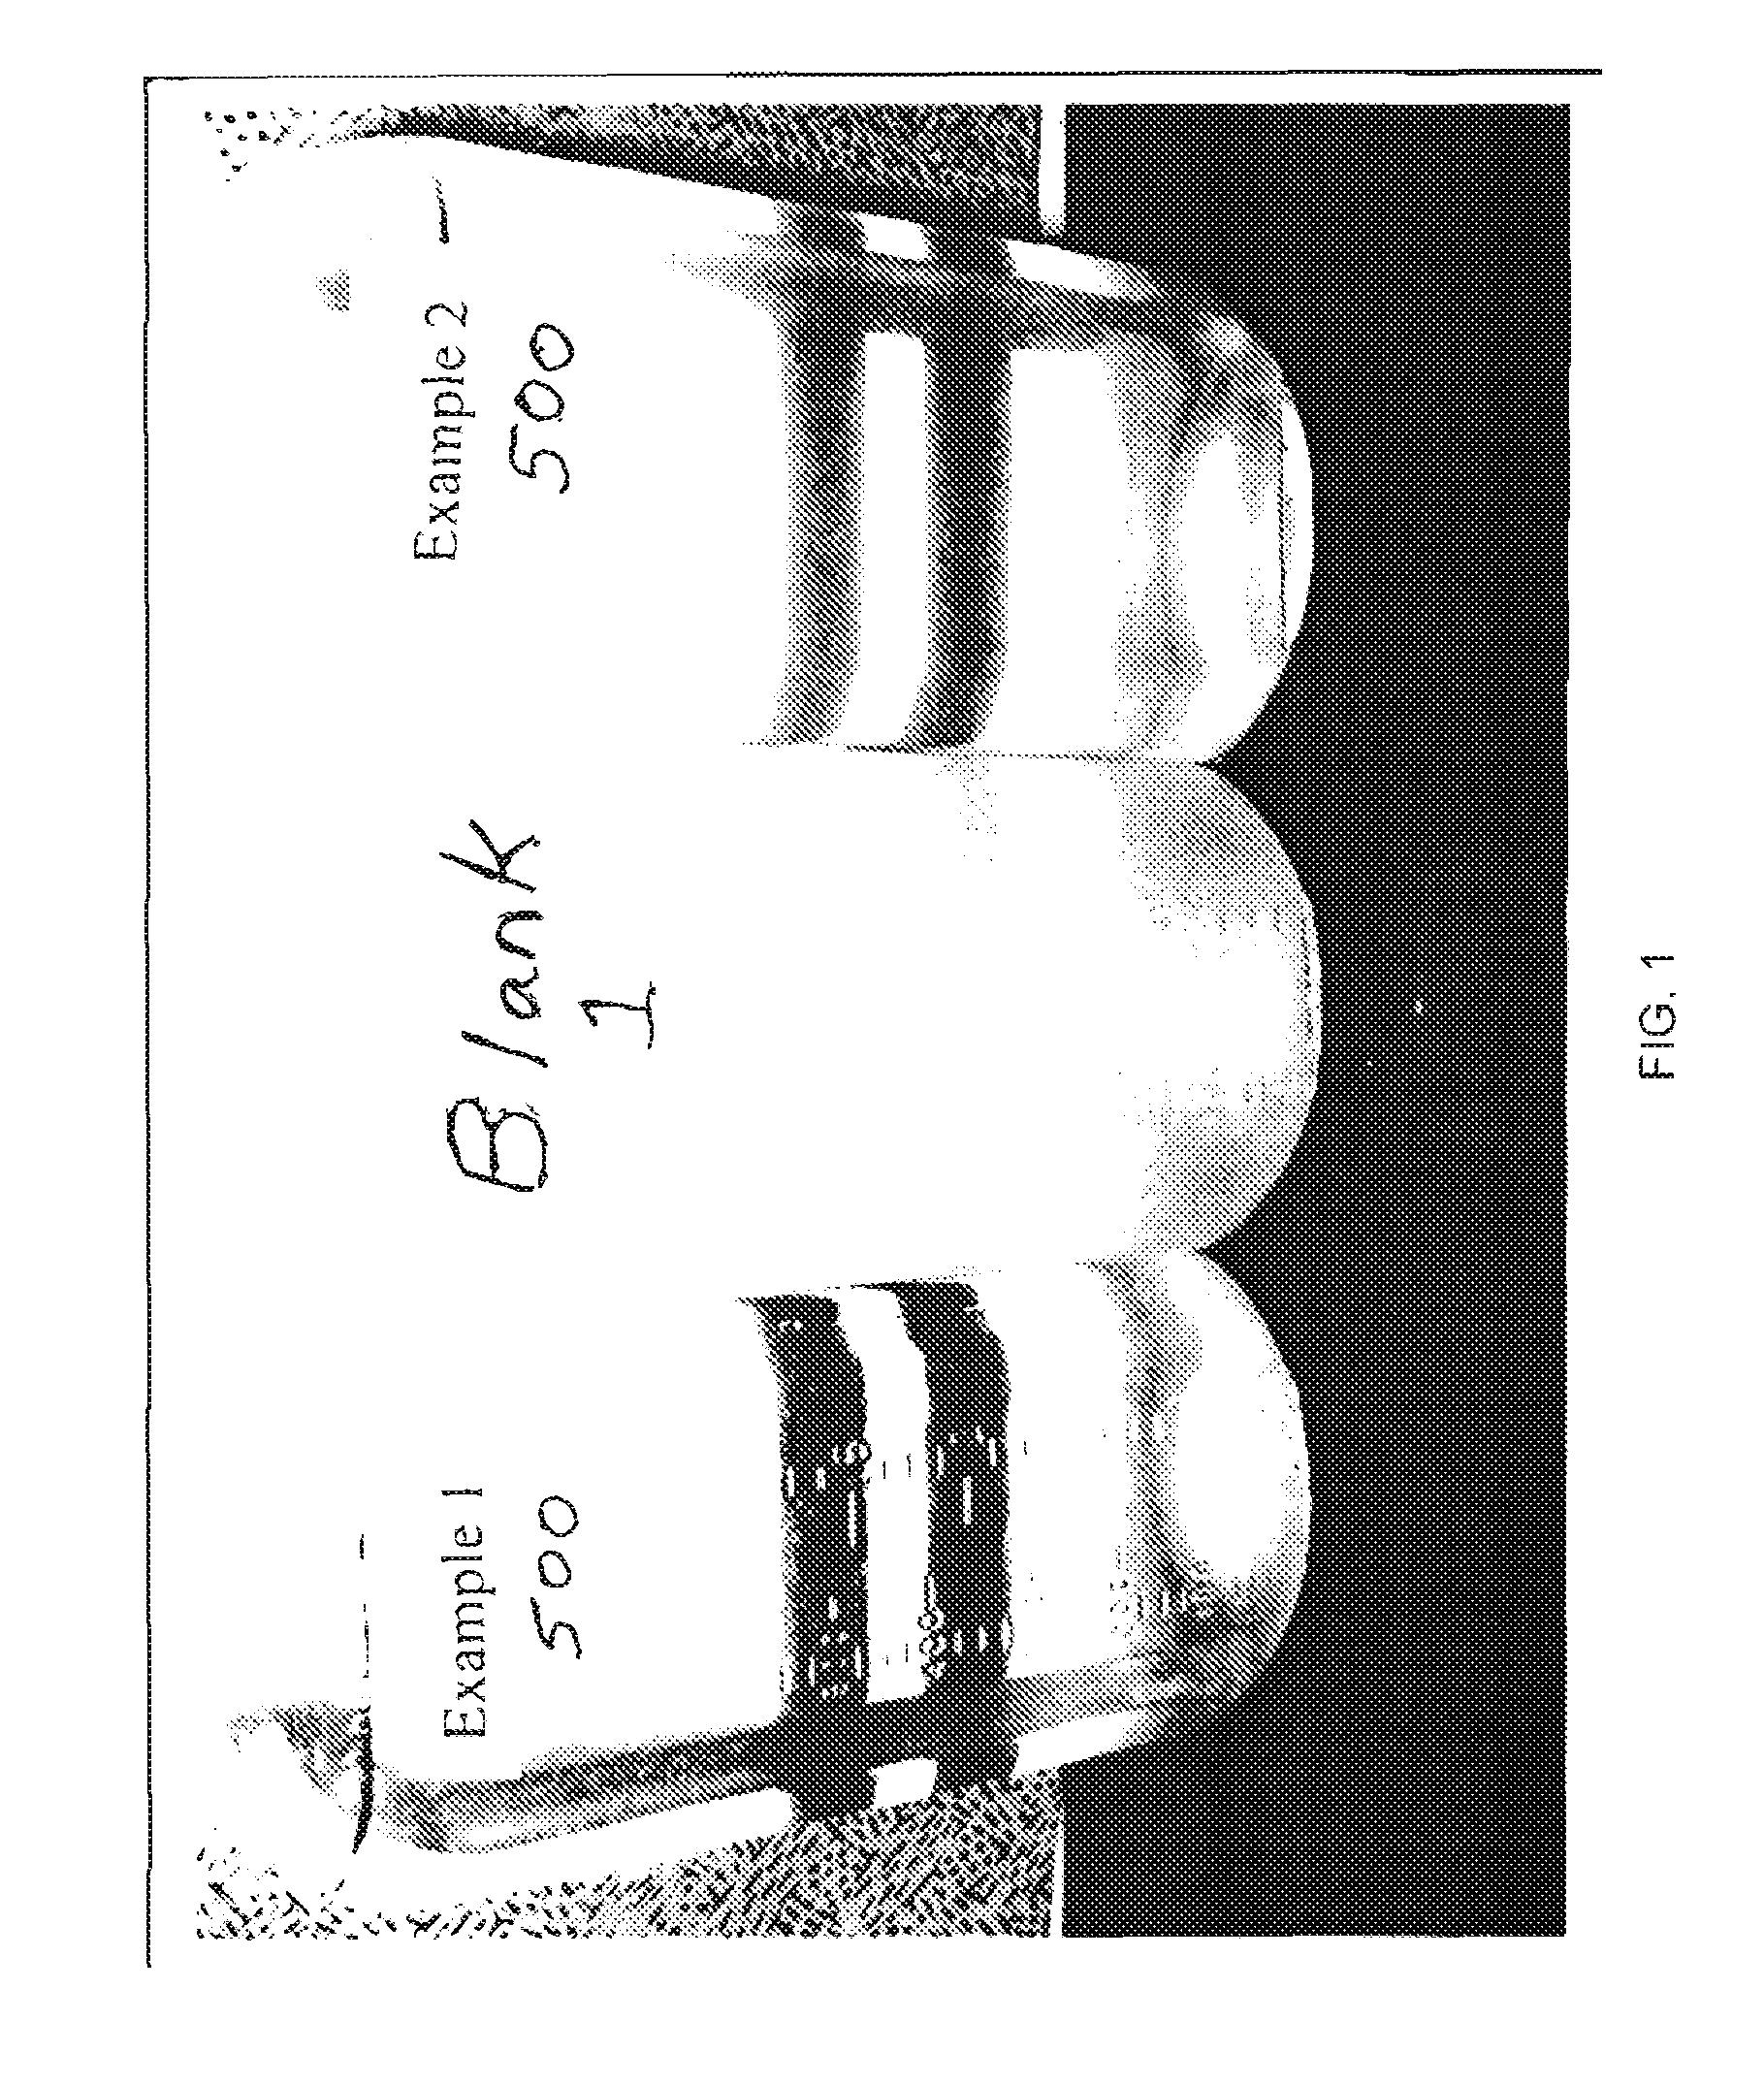 Process for Removing Water and Water Soluble Contaminants From Biofuels